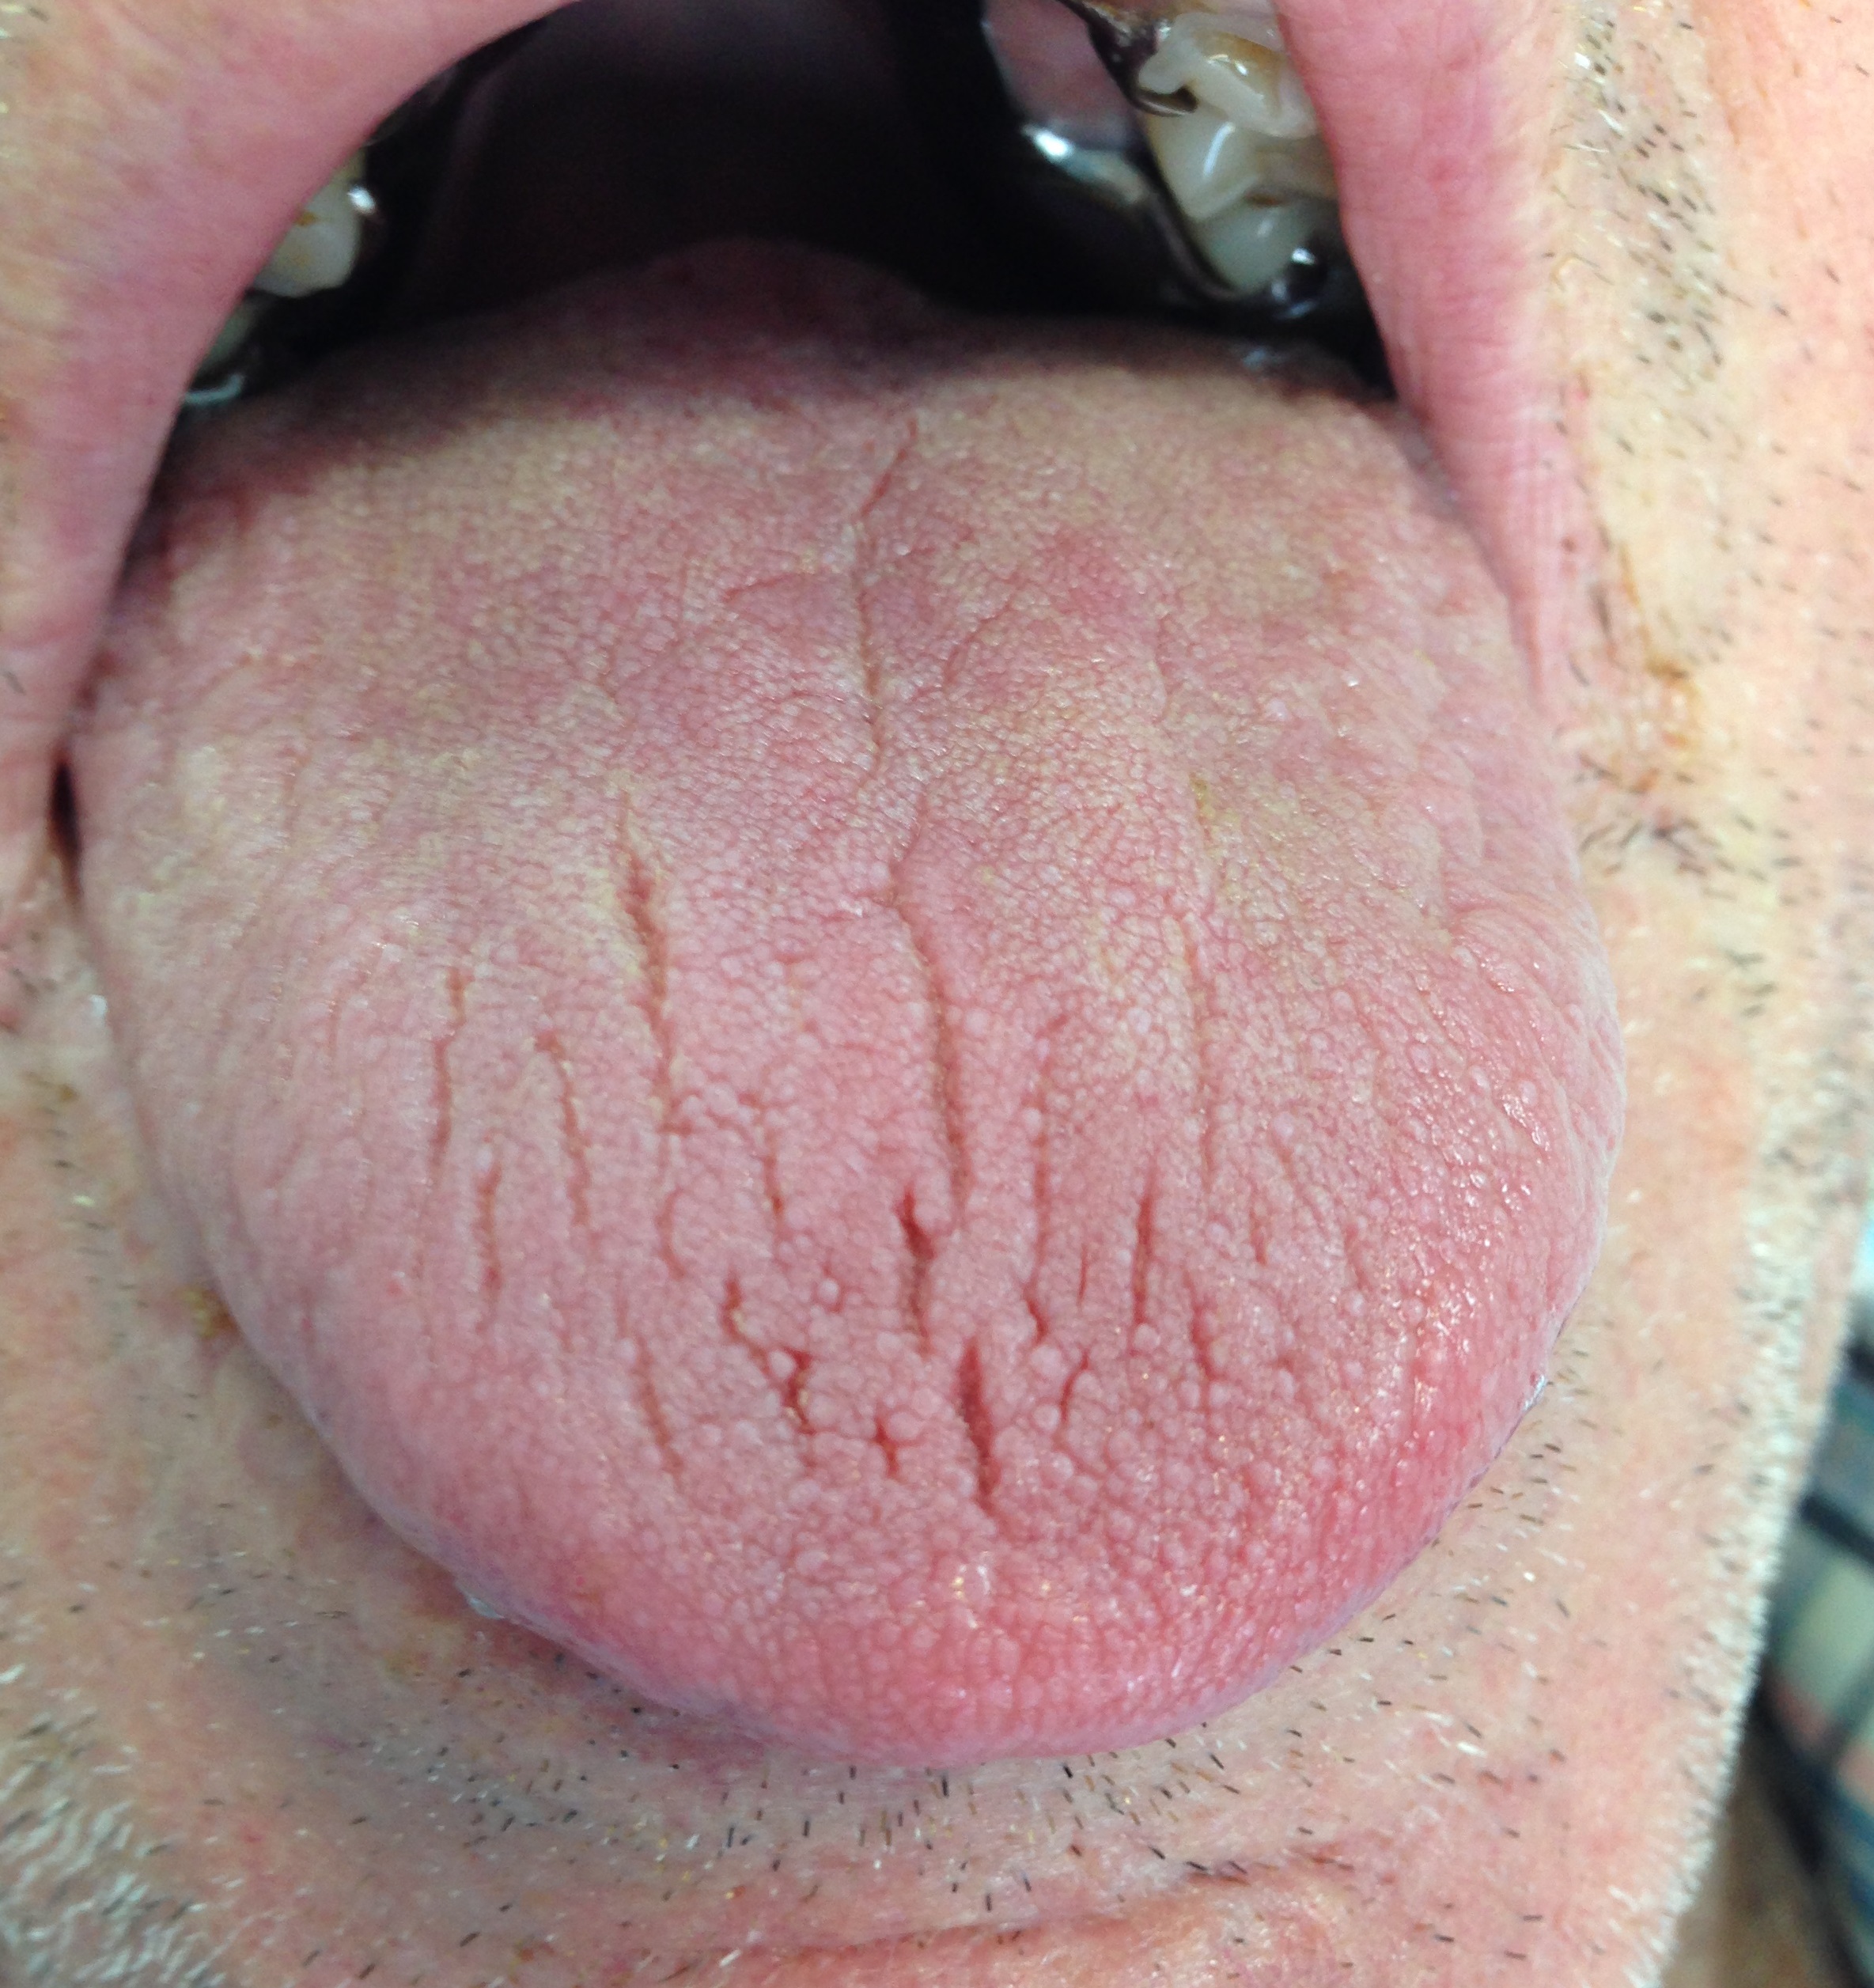 Patient with xerostomia (dry mouth). Note the fissures on the dorsum of the tongue.